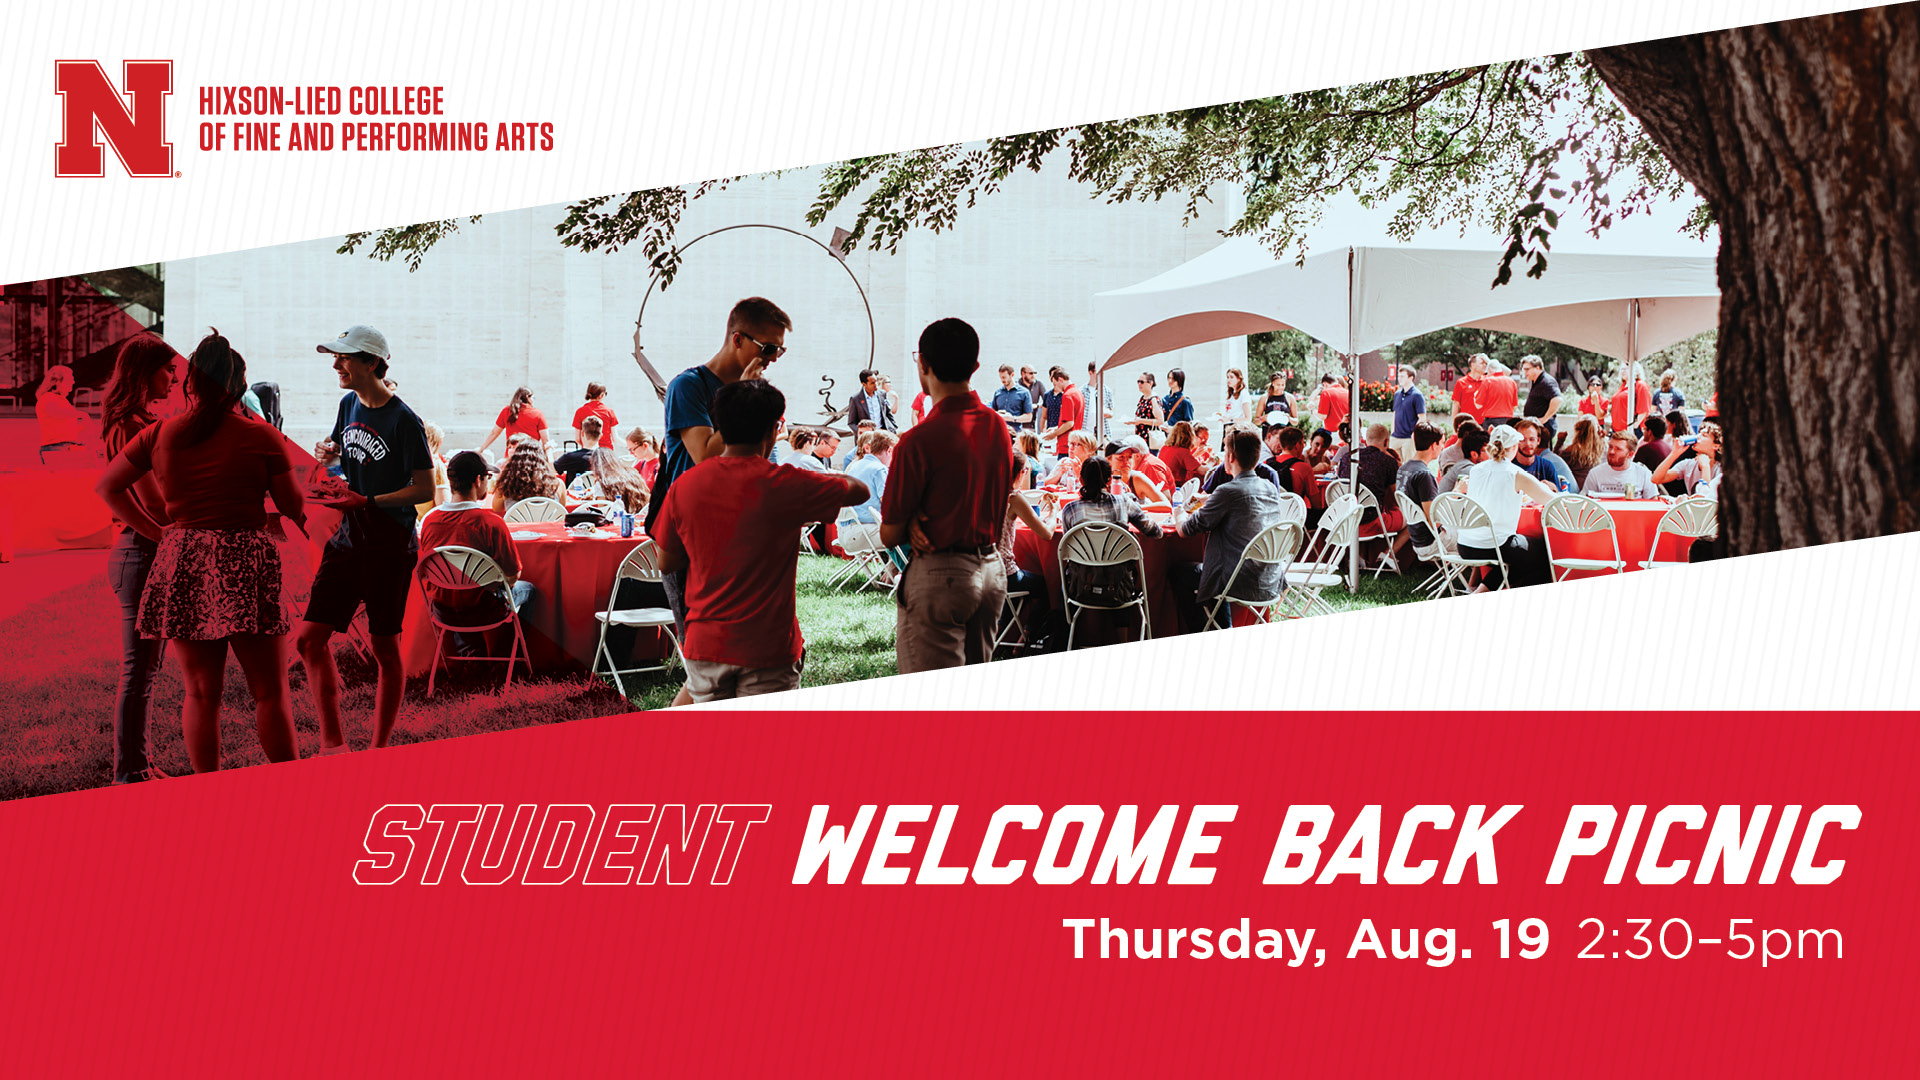 The Hixson-Lied College Student Welcome Back Picnic is Thursday, Aug. 19.